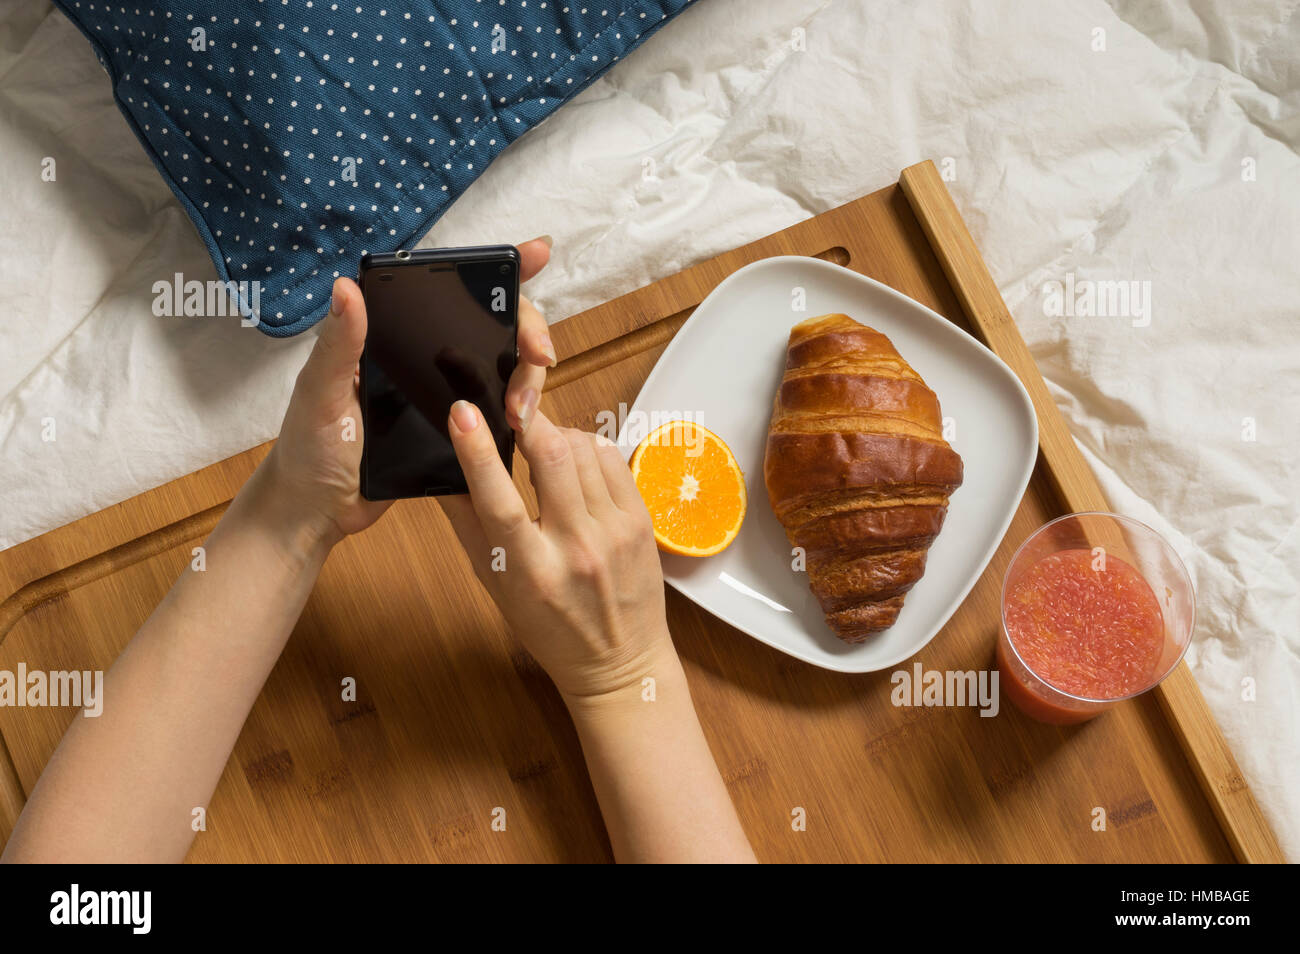 Woman hands working with mobile phone at bed and having breakfast Stock Photo